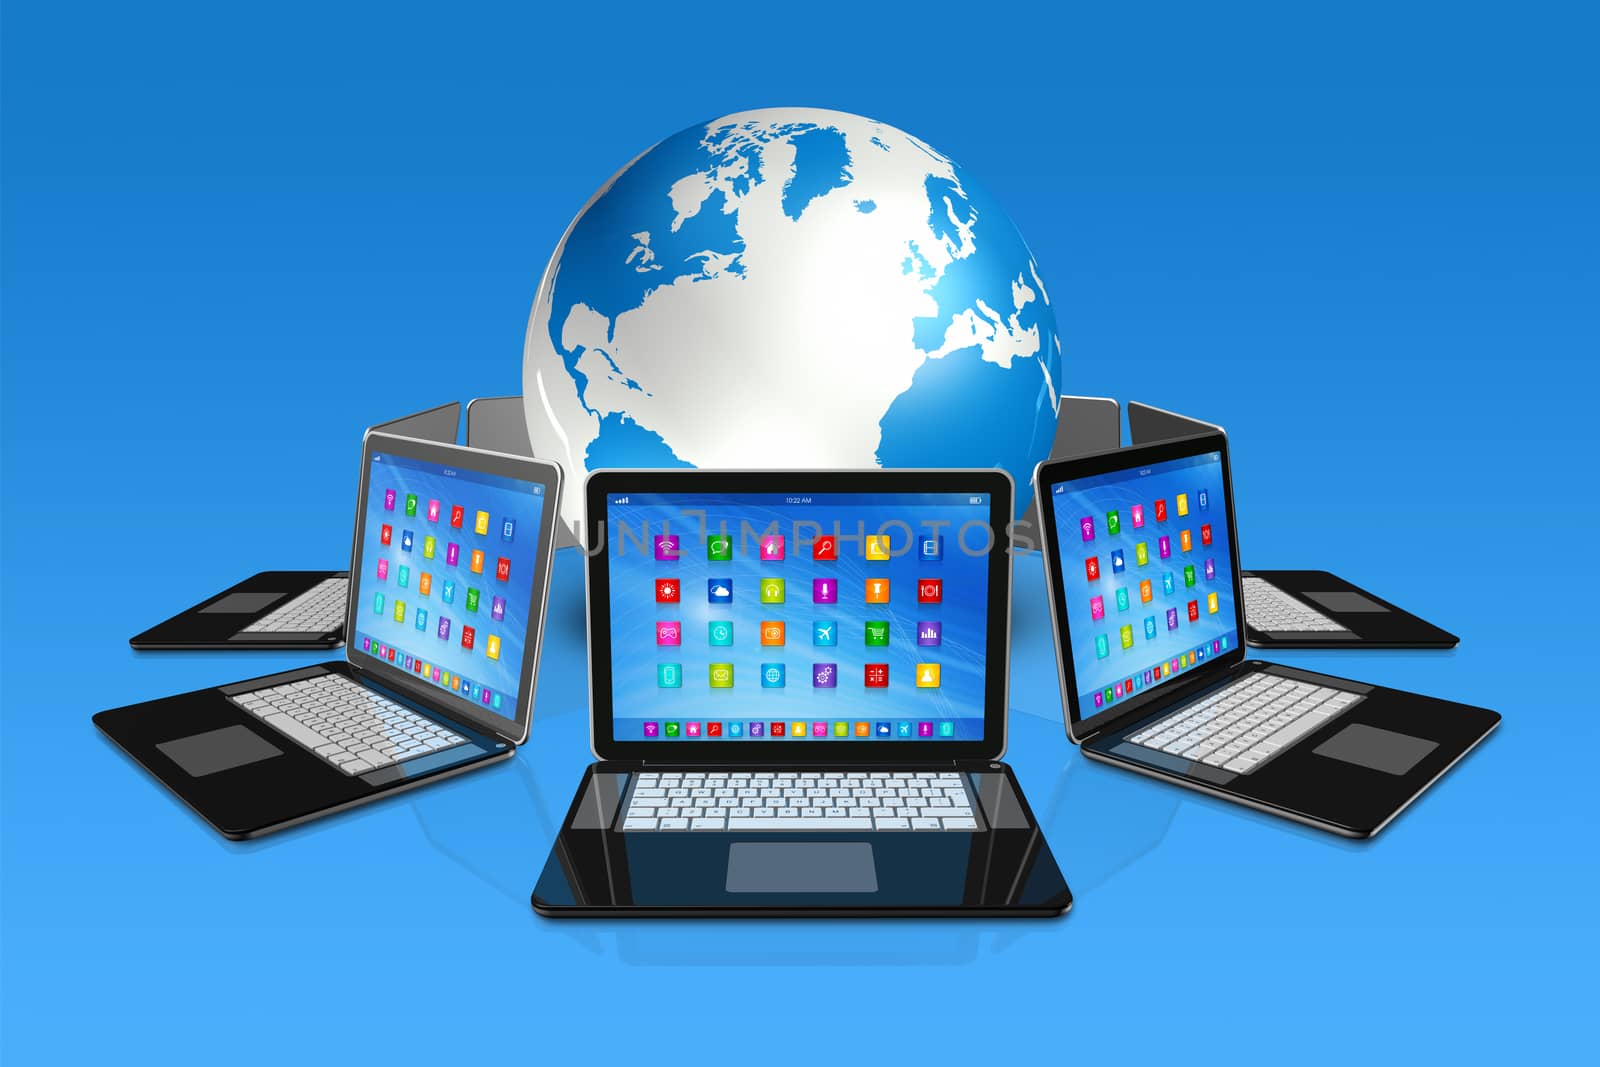 3D Laptop Computers around World Globe - apps icons interface - isolated on blue